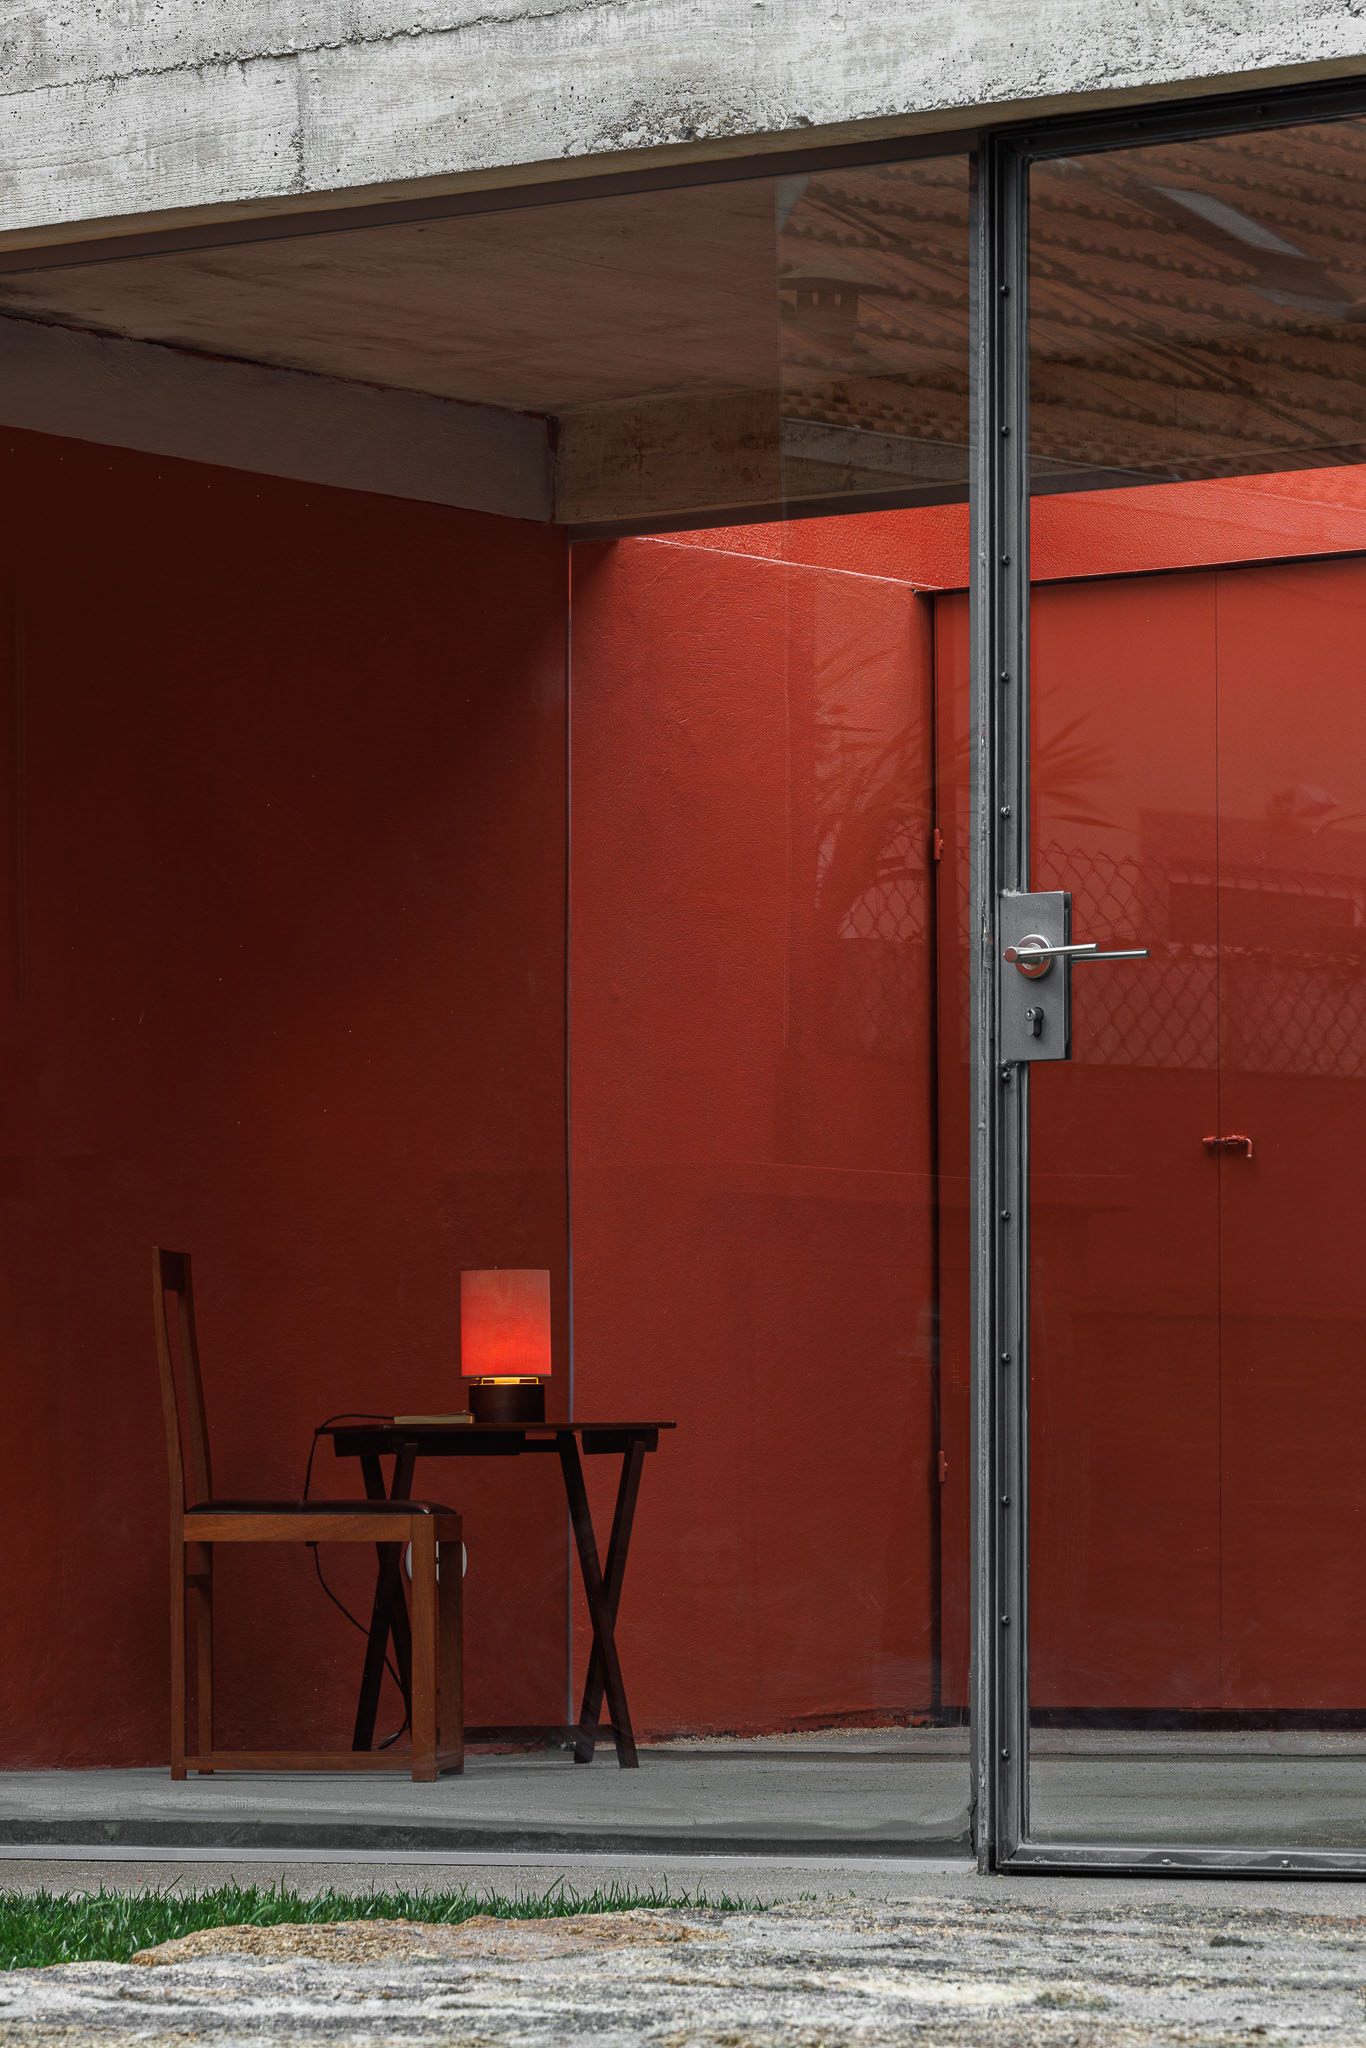 Surfaces with a red hue in the room can still be seen from the outside through its wide glass openings